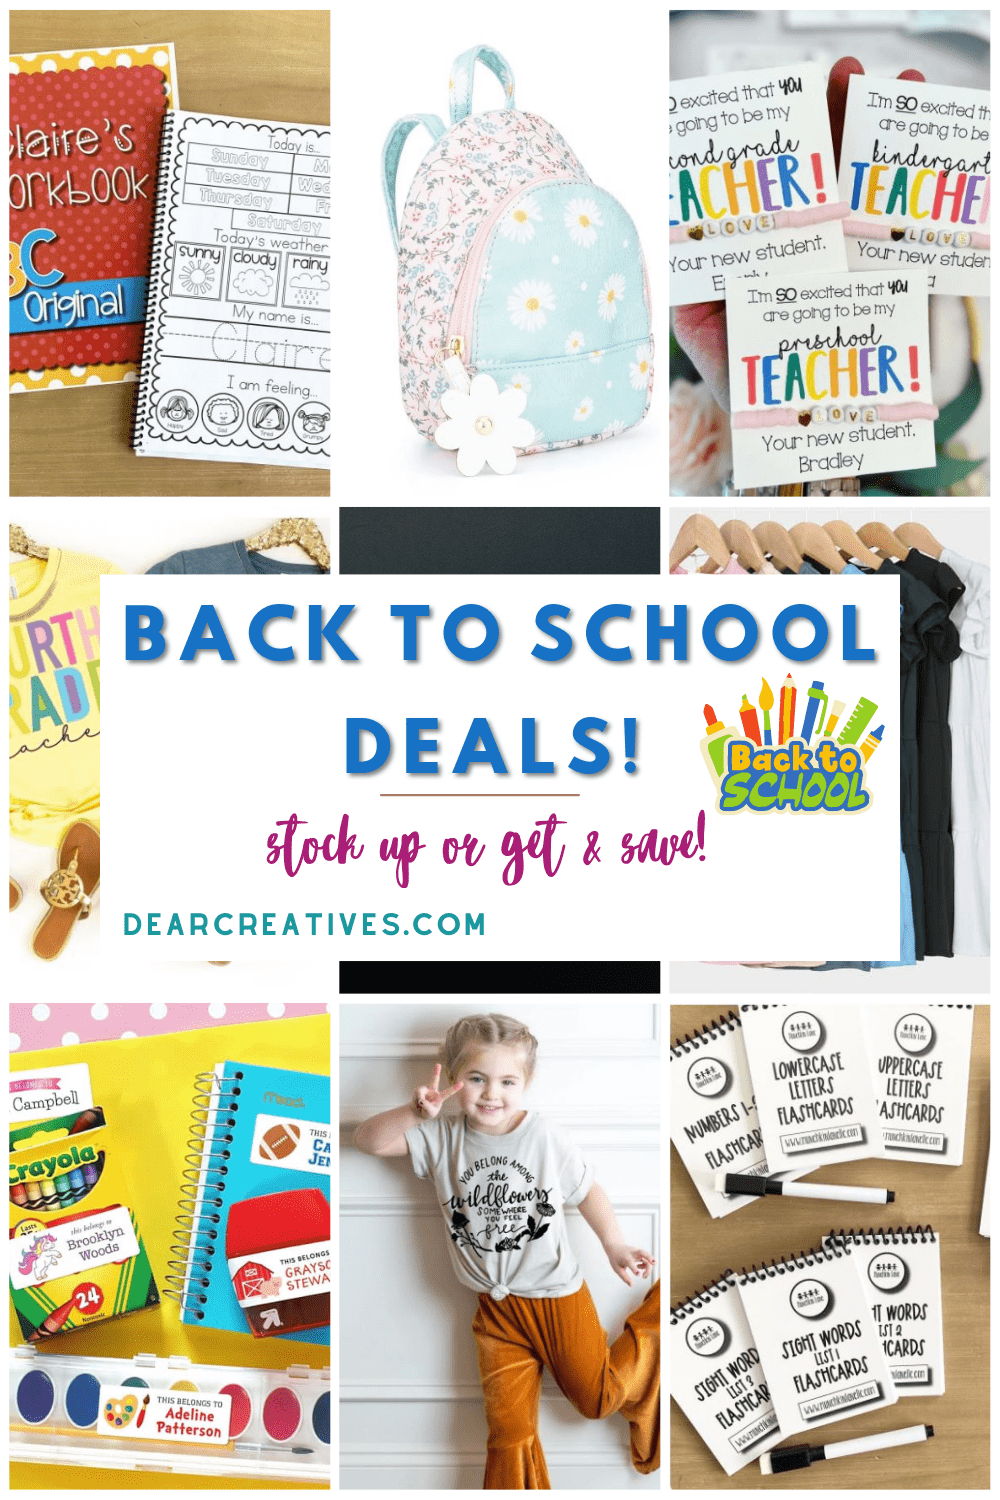 Back To School Shopping Deals, You Can’t-Miss!